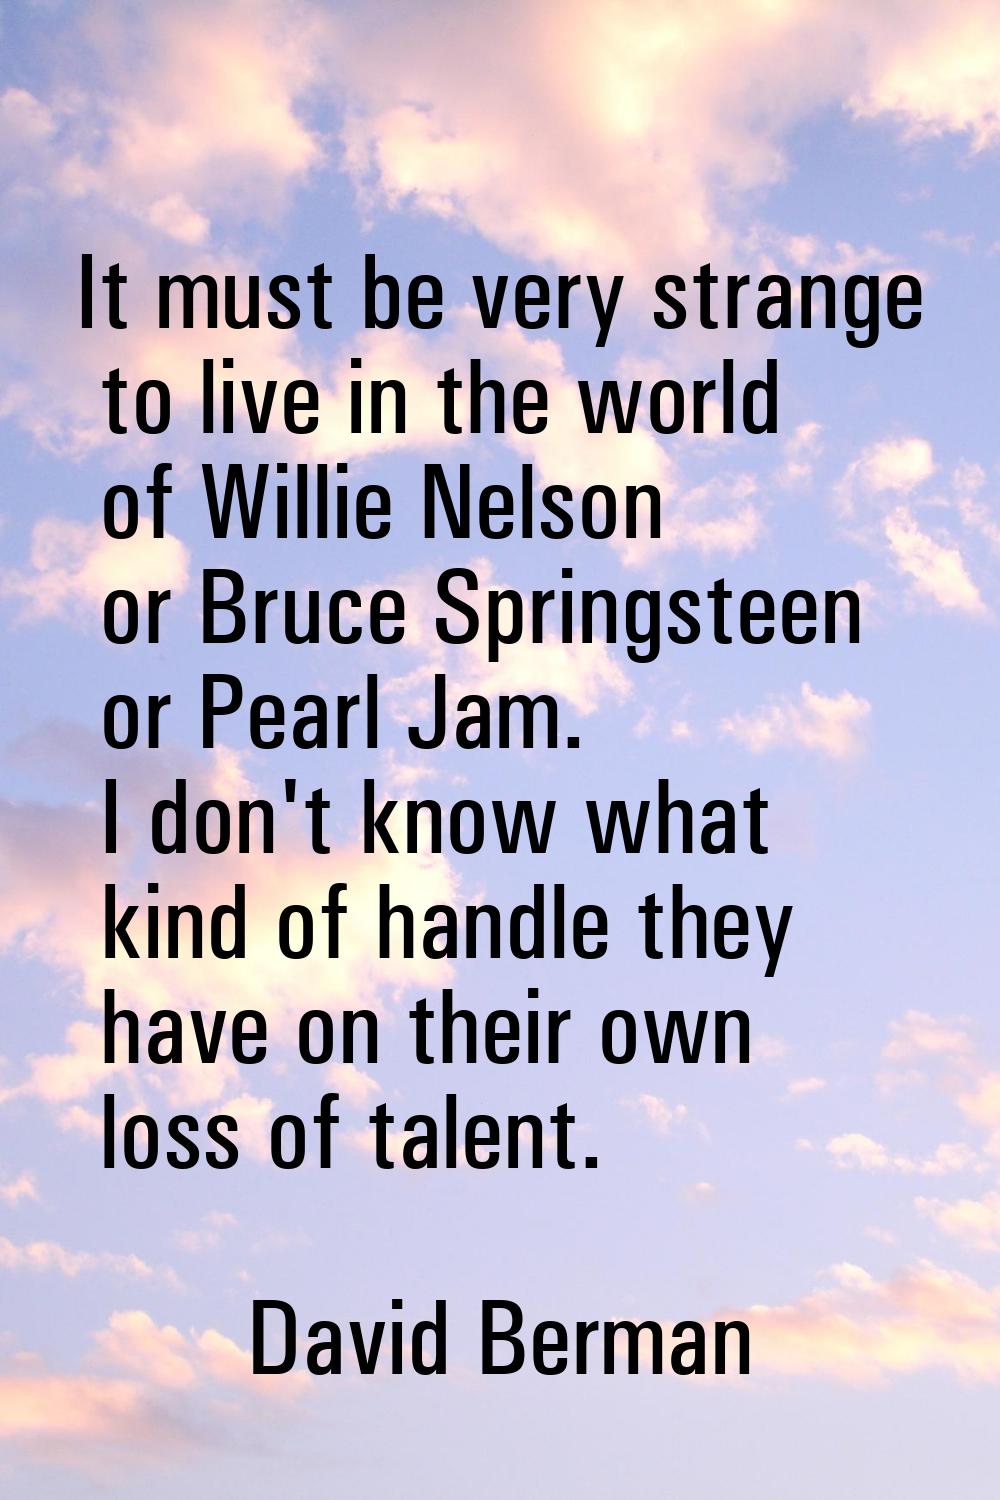 It must be very strange to live in the world of Willie Nelson or Bruce Springsteen or Pearl Jam. I 